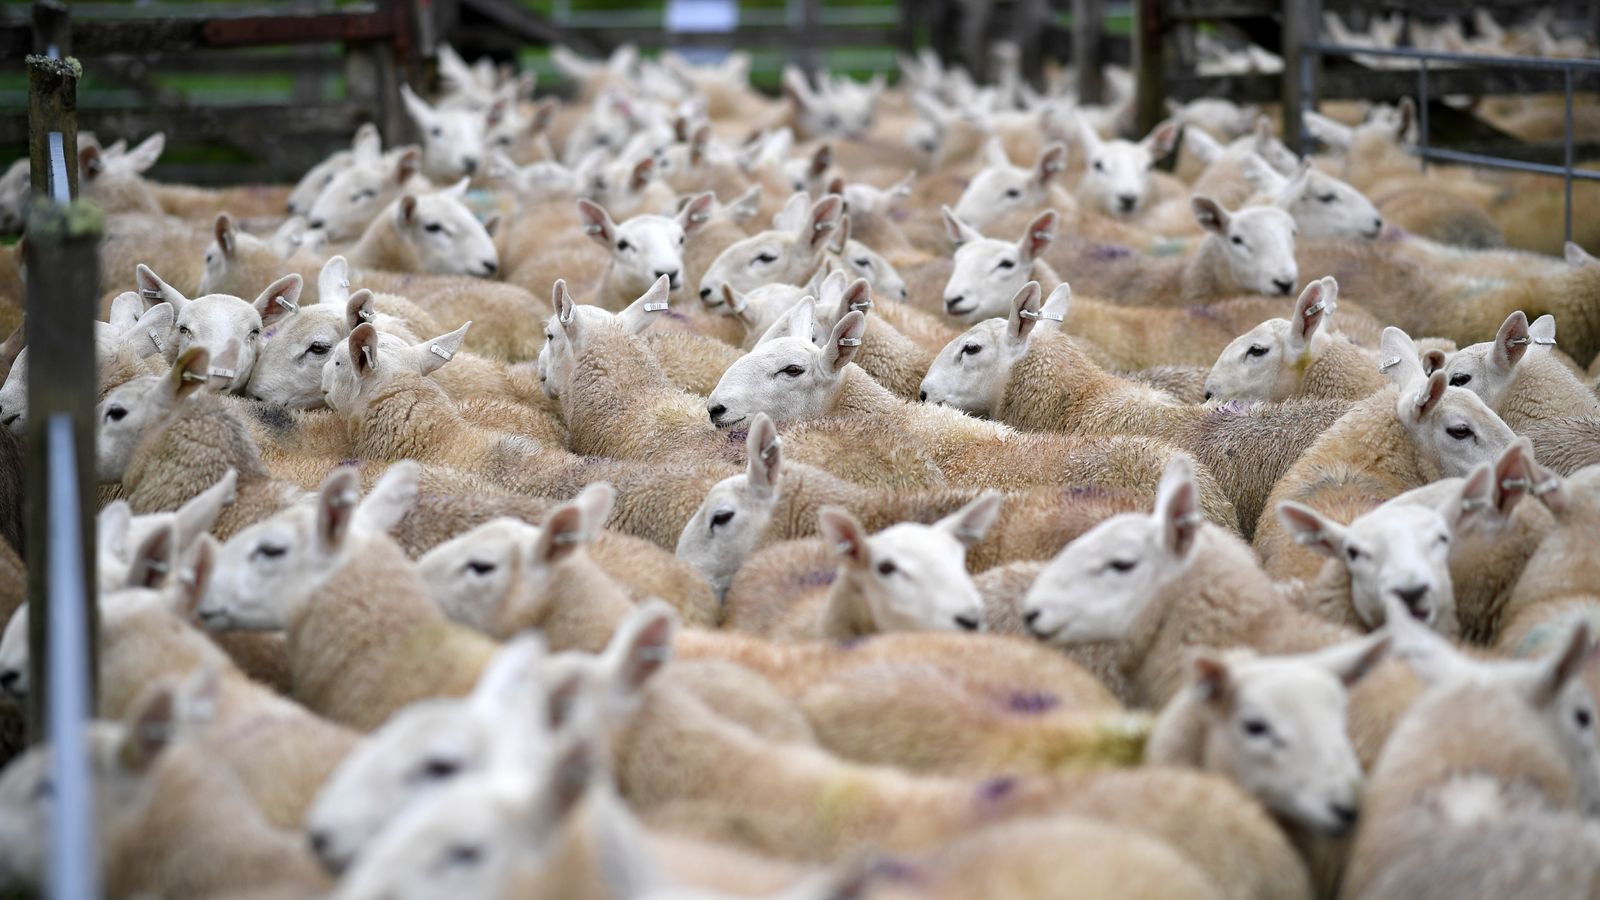 Police looking for 500 sheep stolen from field in Norfolk